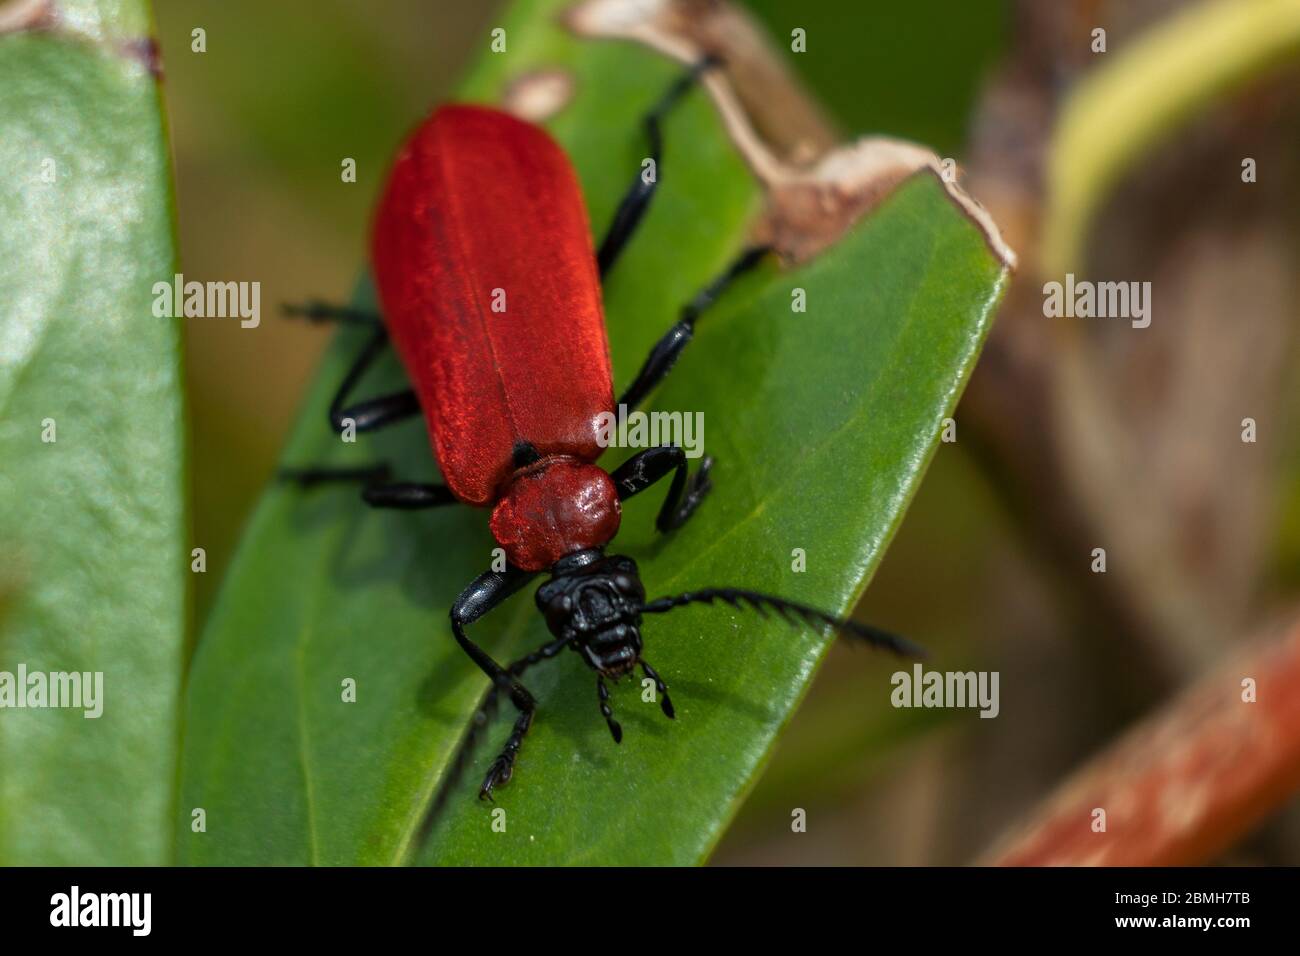 Insect, scarlet fire beetle on a green leaf Stock Photo